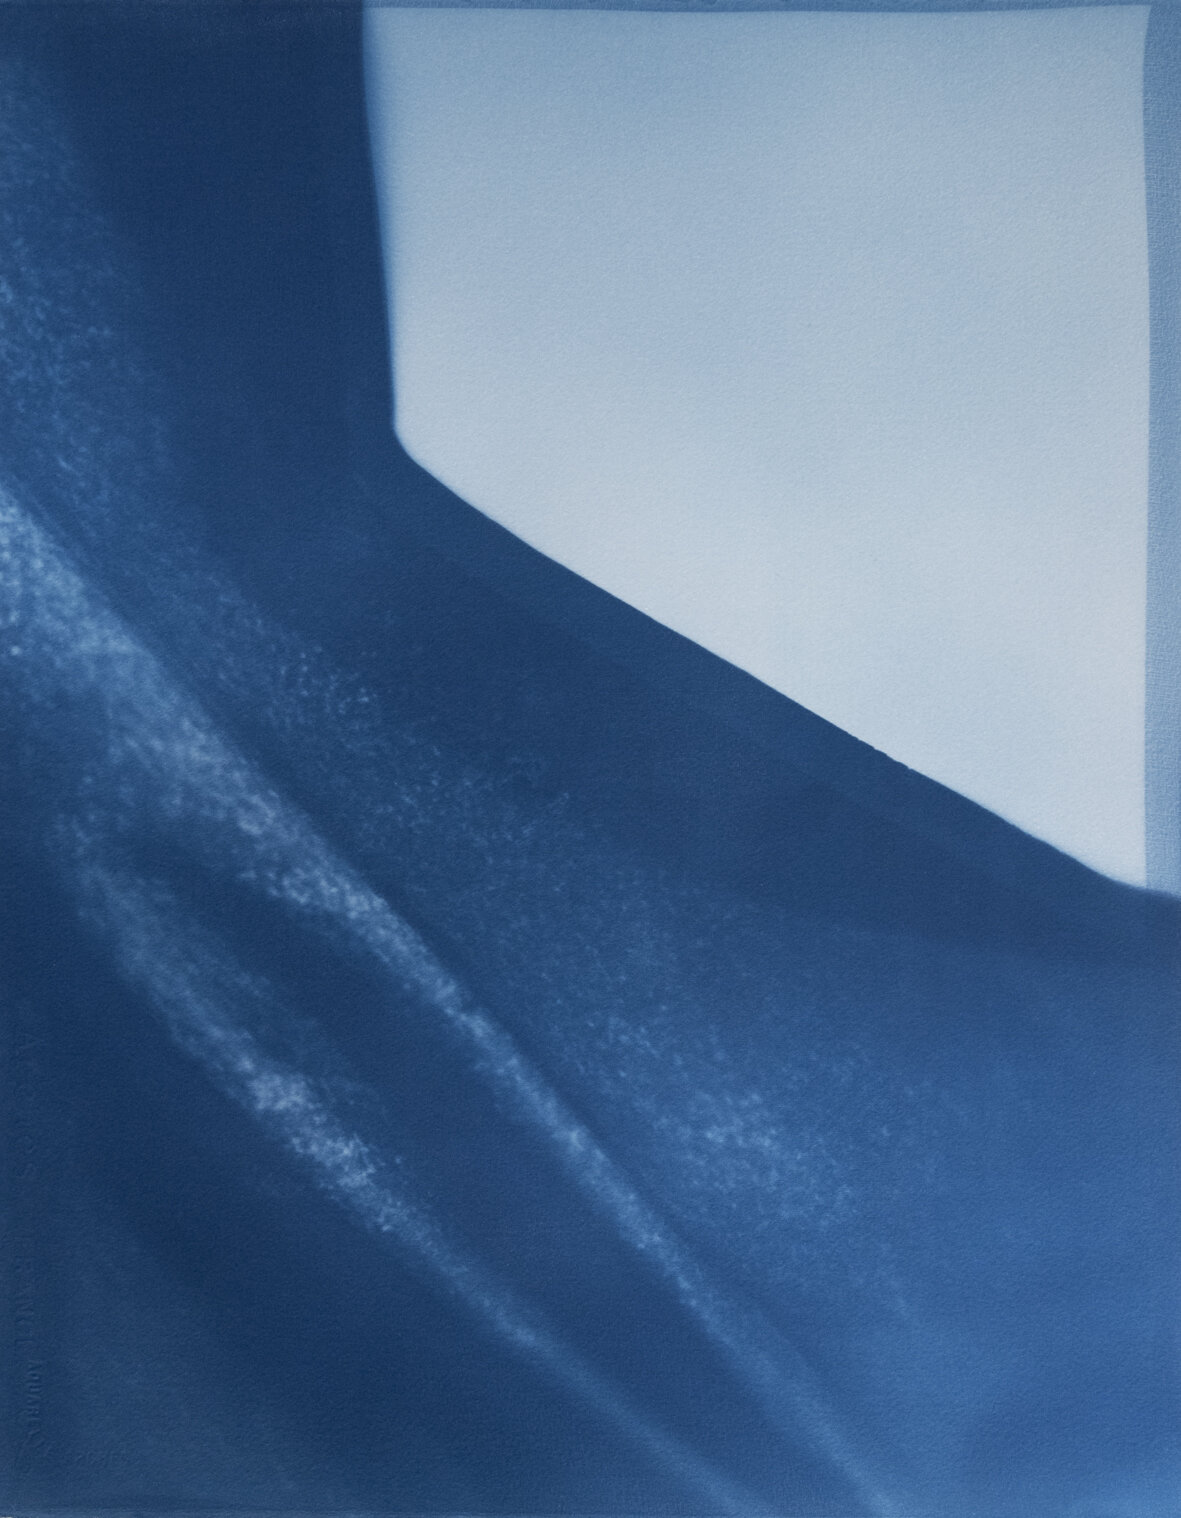    Blue spectrum and descent   2020  Cyanotypes on watercolour paper 52 x 42 cm (framed, white box w/glazing) 50.5 x 40.5 cm (sheet) 156 x 672 cm (overall Installation) detail 